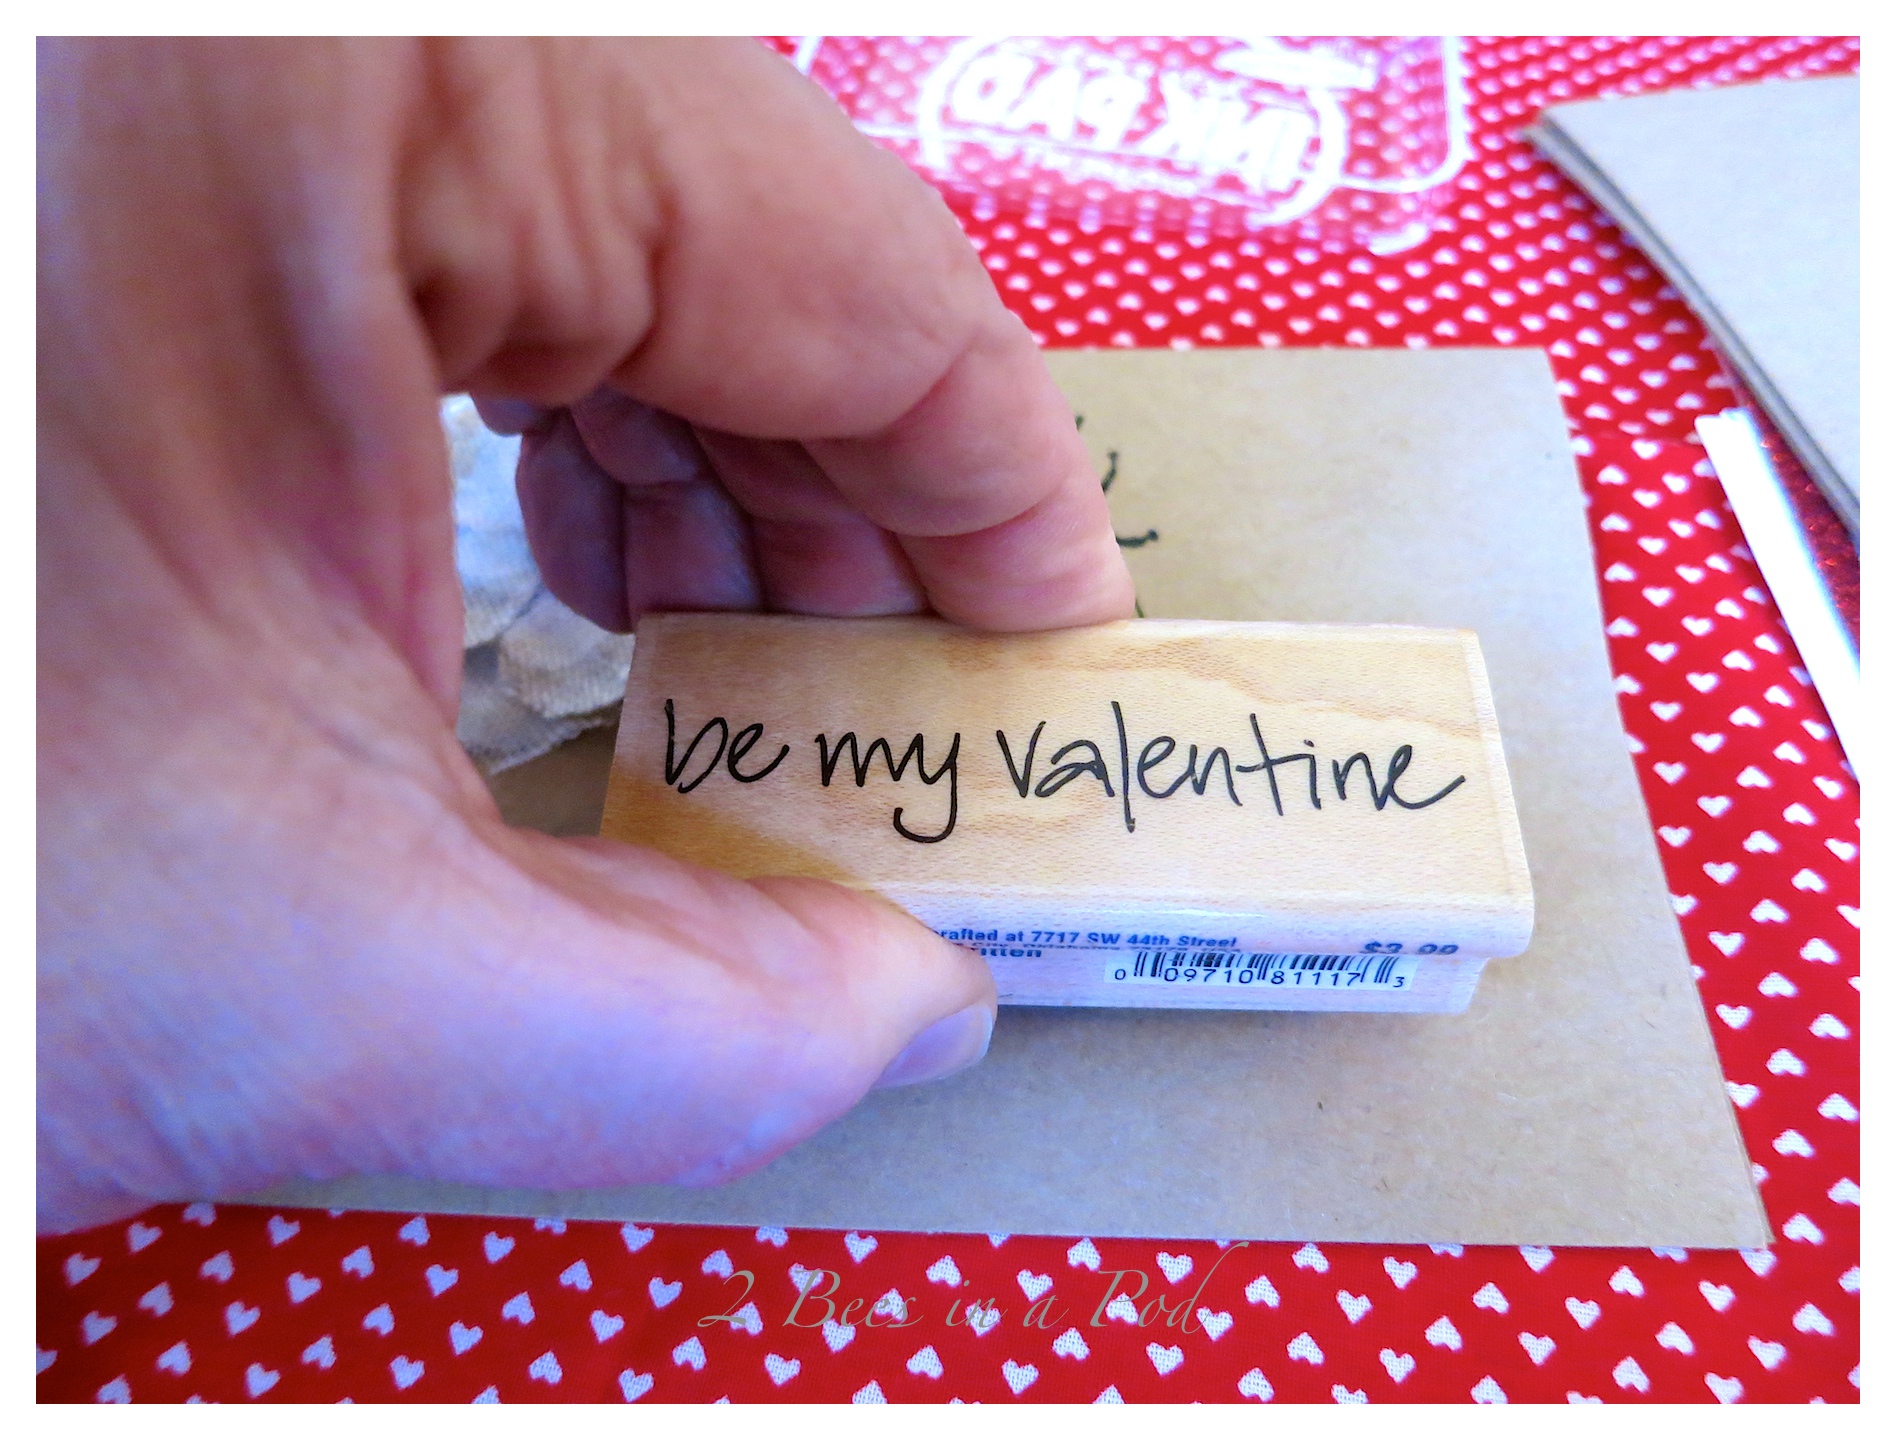 Handmade Valentines - it's fun to play a little and remember when you were a kid making Valentines